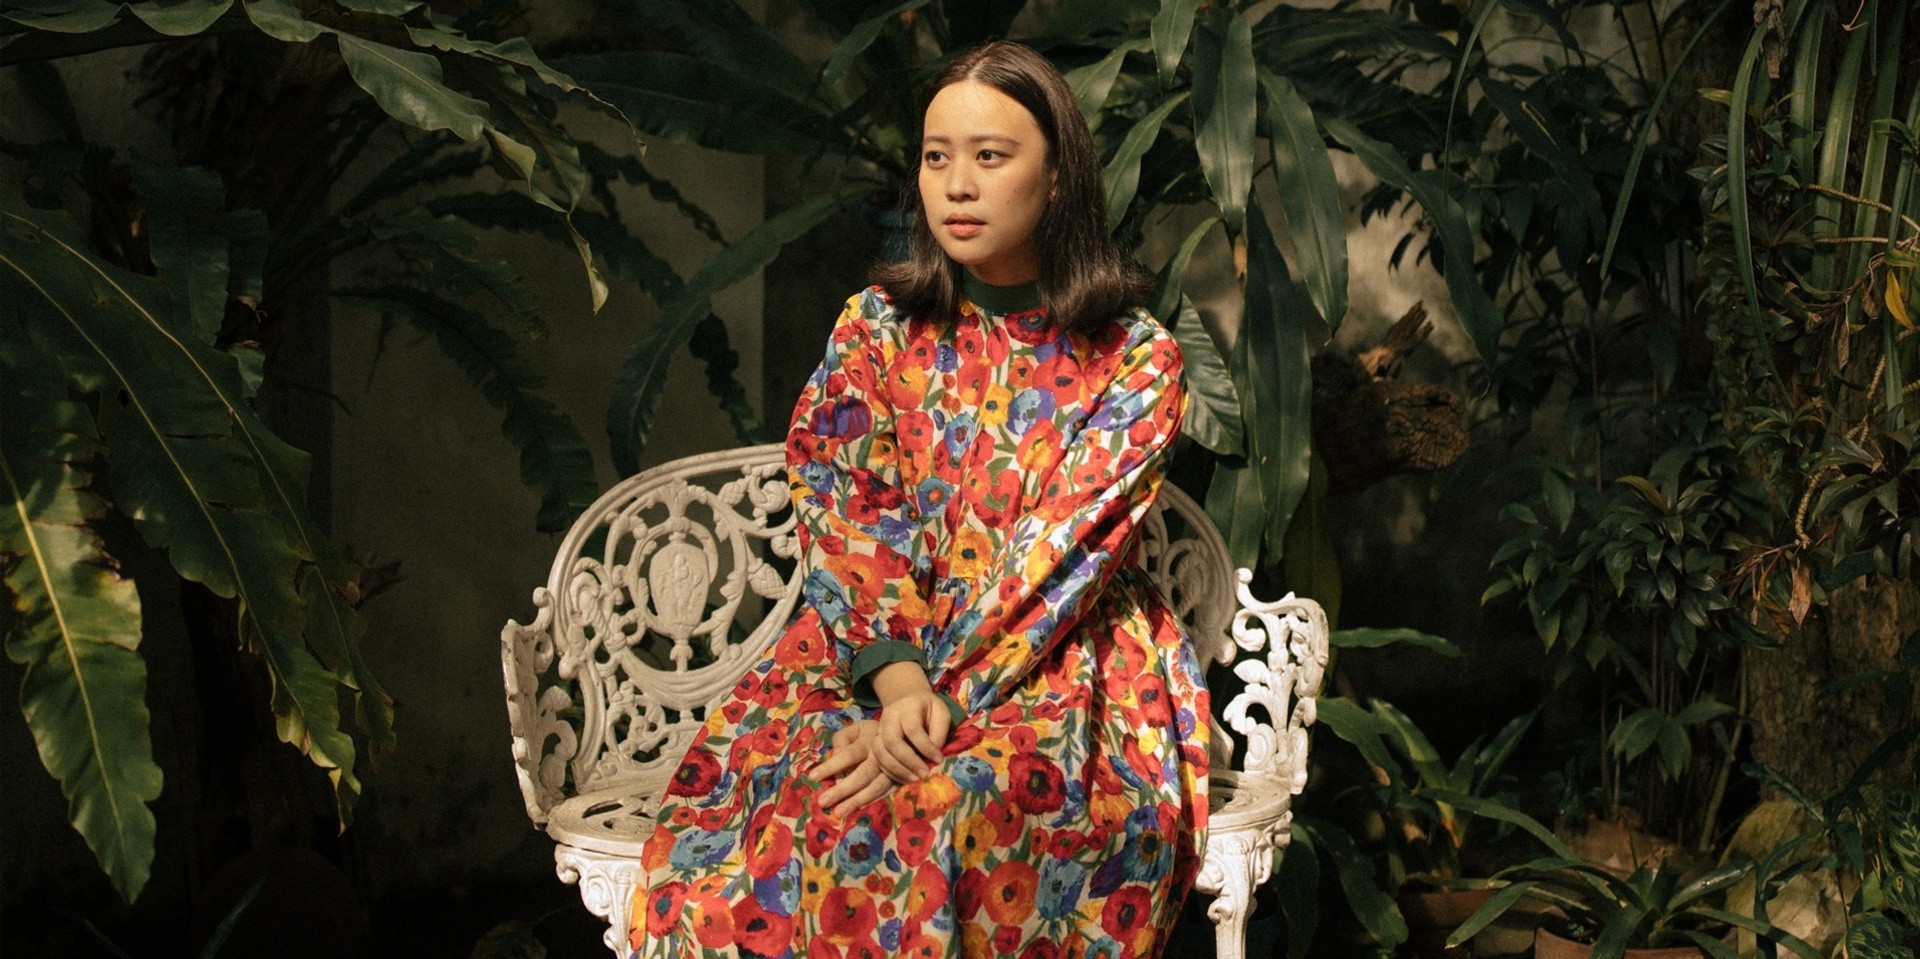 Reese Lansangan counts down to the release of Playing Pretend in the Interim EP with exclusive sneak peek